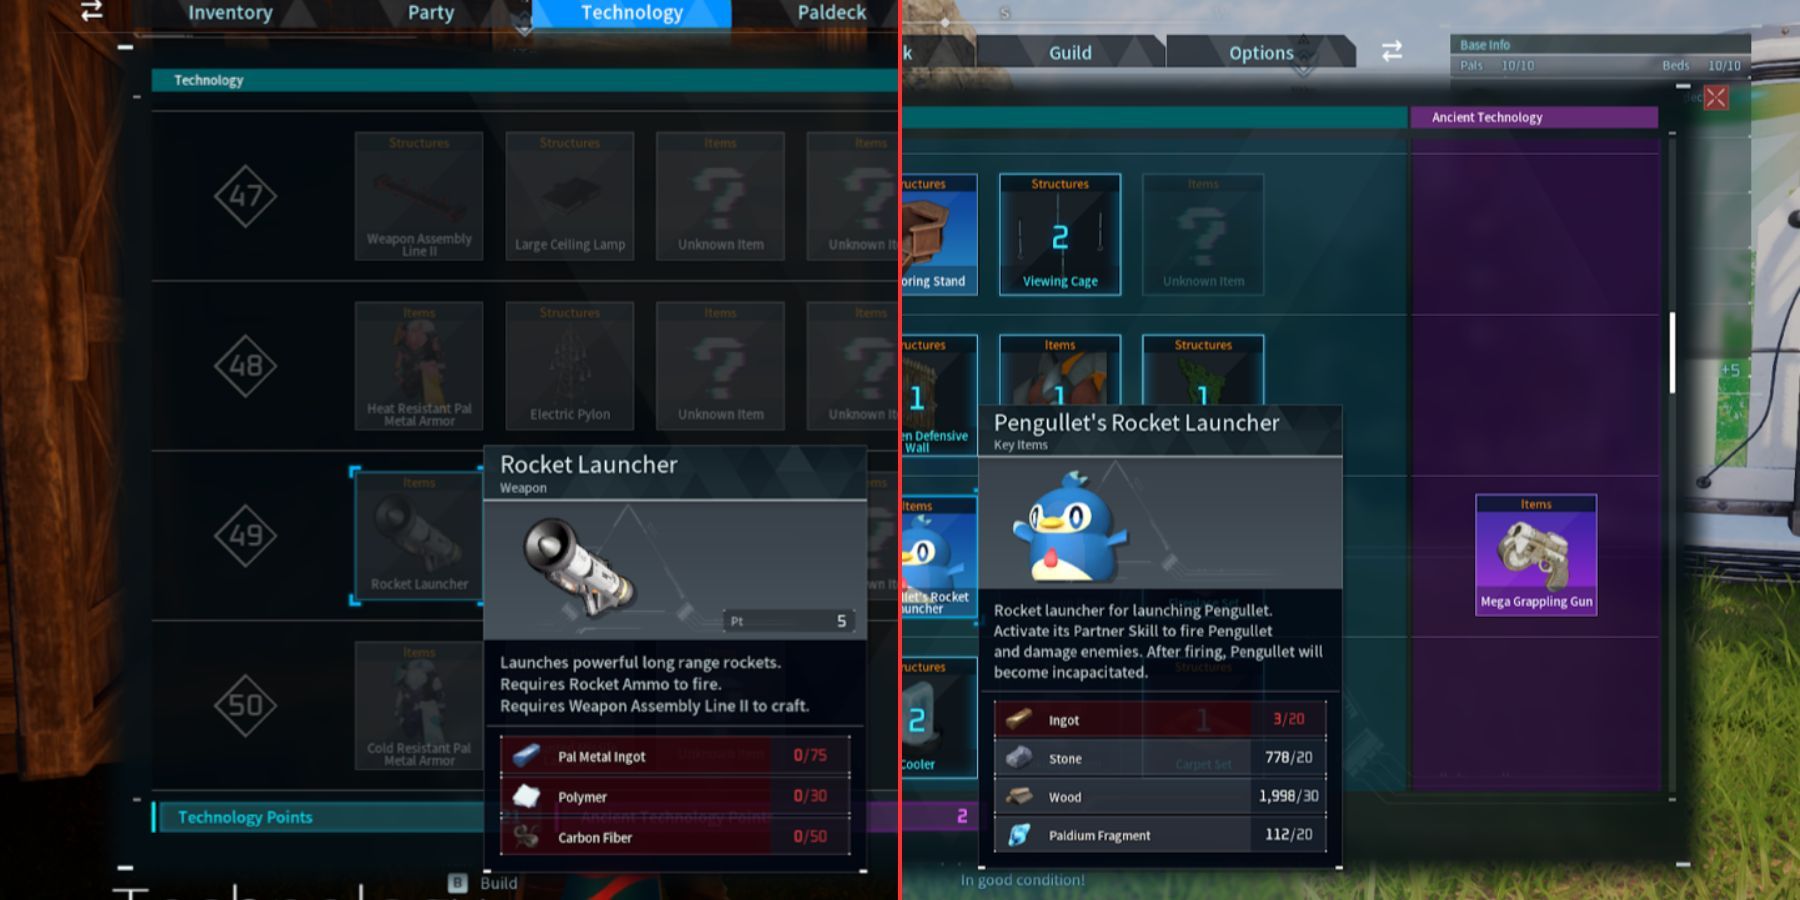 Palworld: How to Get Rocket Launcher